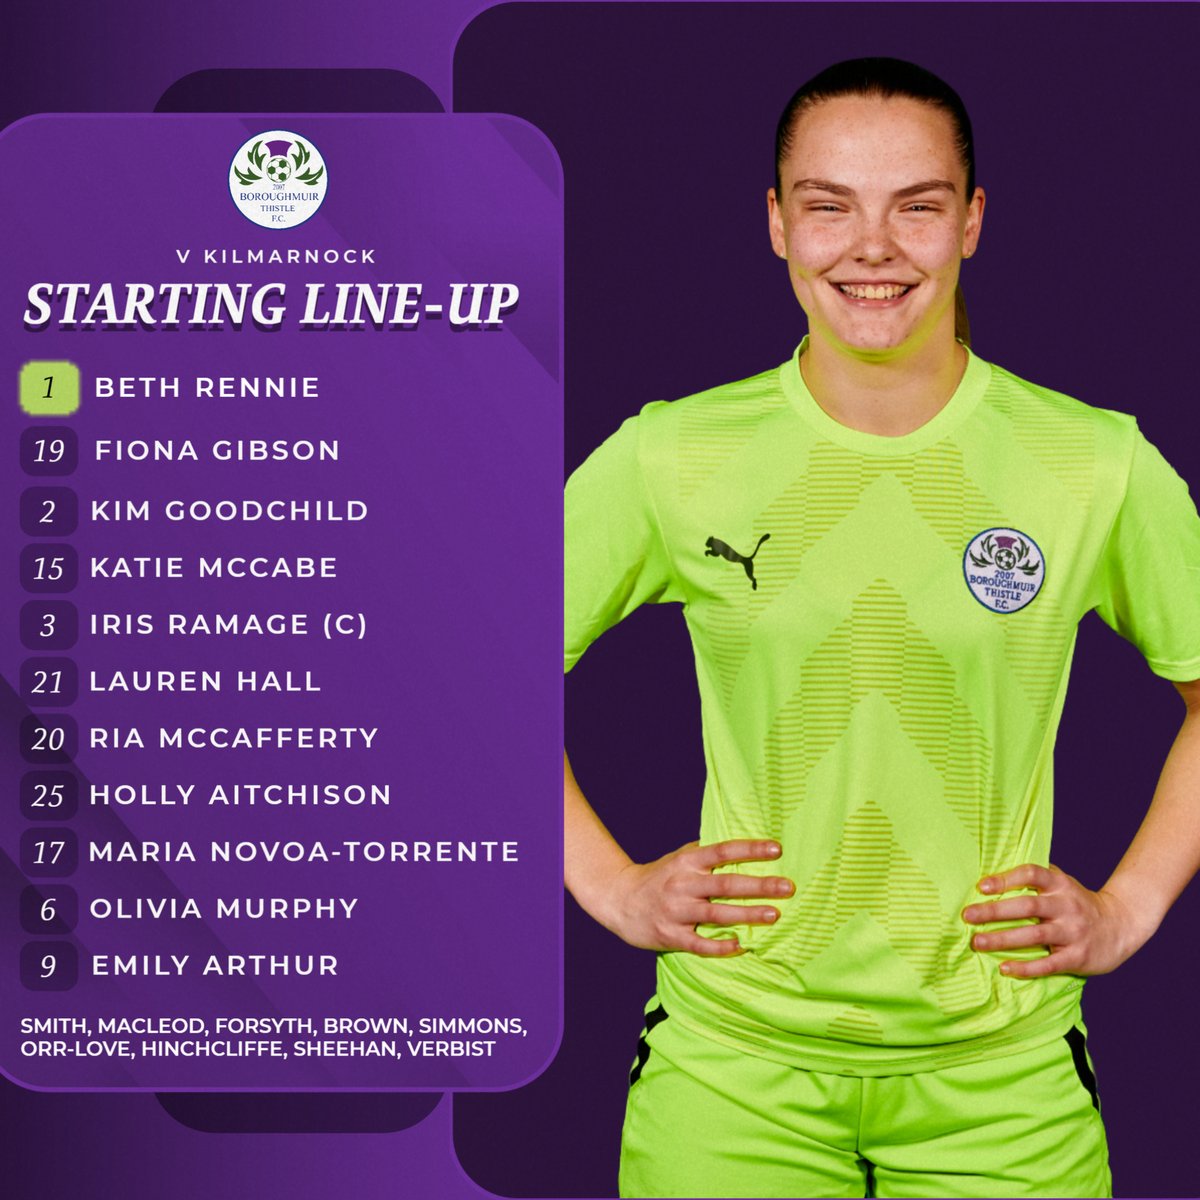 𝗦𝗧𝗔𝗥𝗧𝗜𝗡𝗚 𝗟𝗜𝗡𝗘-𝗨𝗣 👥 Good afternoon from Meadowbank! Here's your Boroughmuir Thistle team to play Kilmarnock in our final match of 23/24, with kick-off in just under an hour's time! #ThistleLive